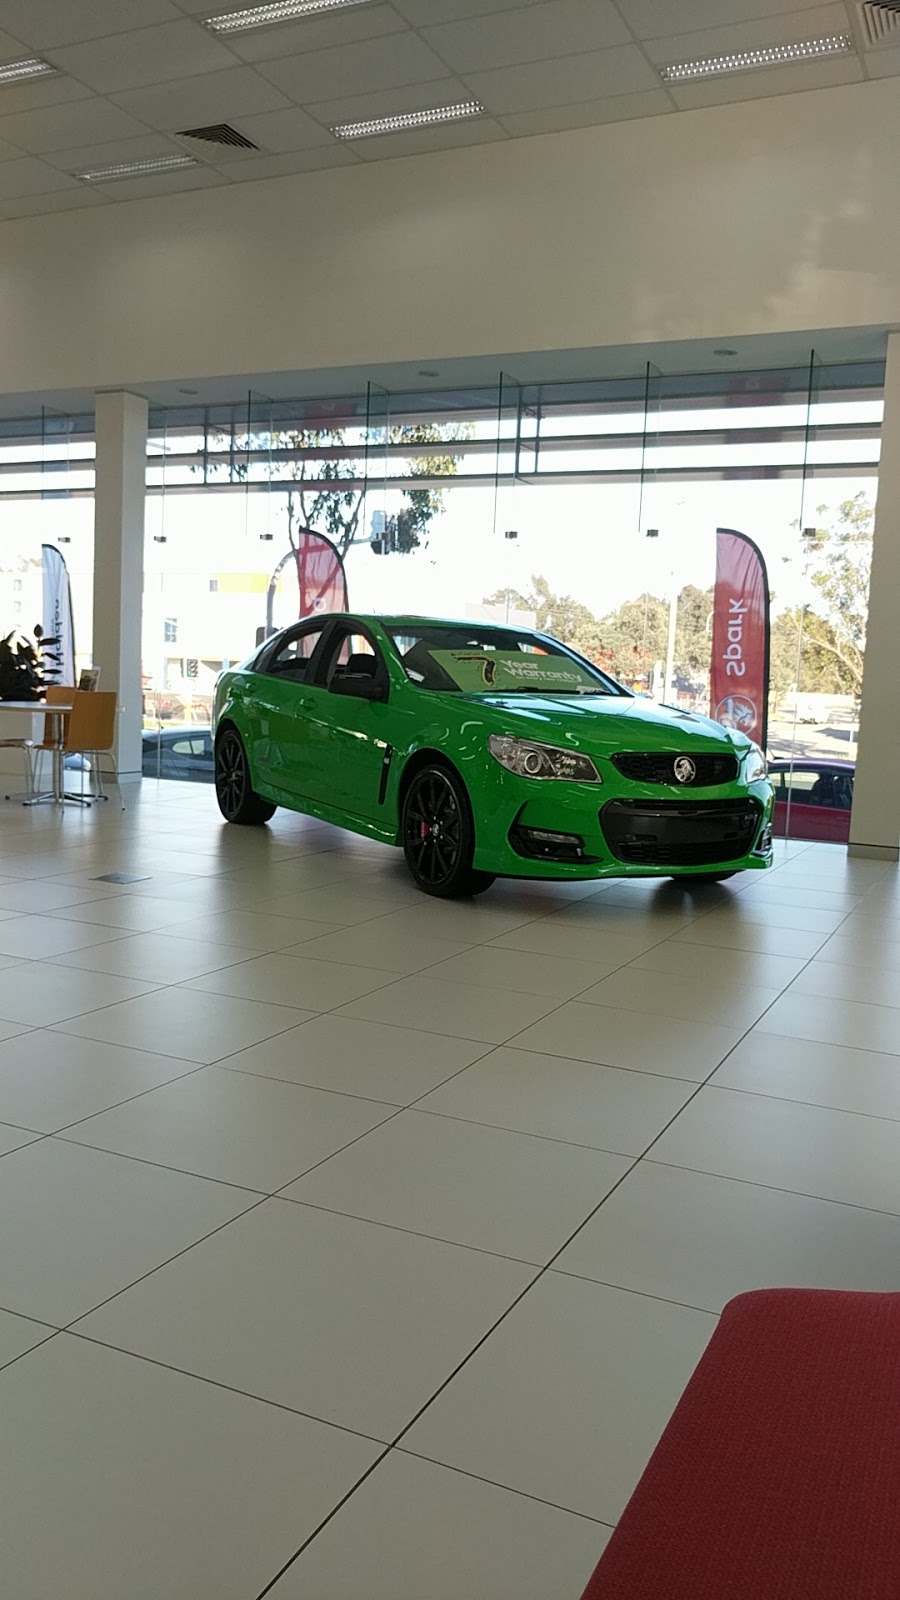 Suttons Holden & HSV Chullora | Cnr Hume Highway & Waterloo Road Showroom 2, Chullora NSW 2190, Australia | Phone: (02) 9642 0233